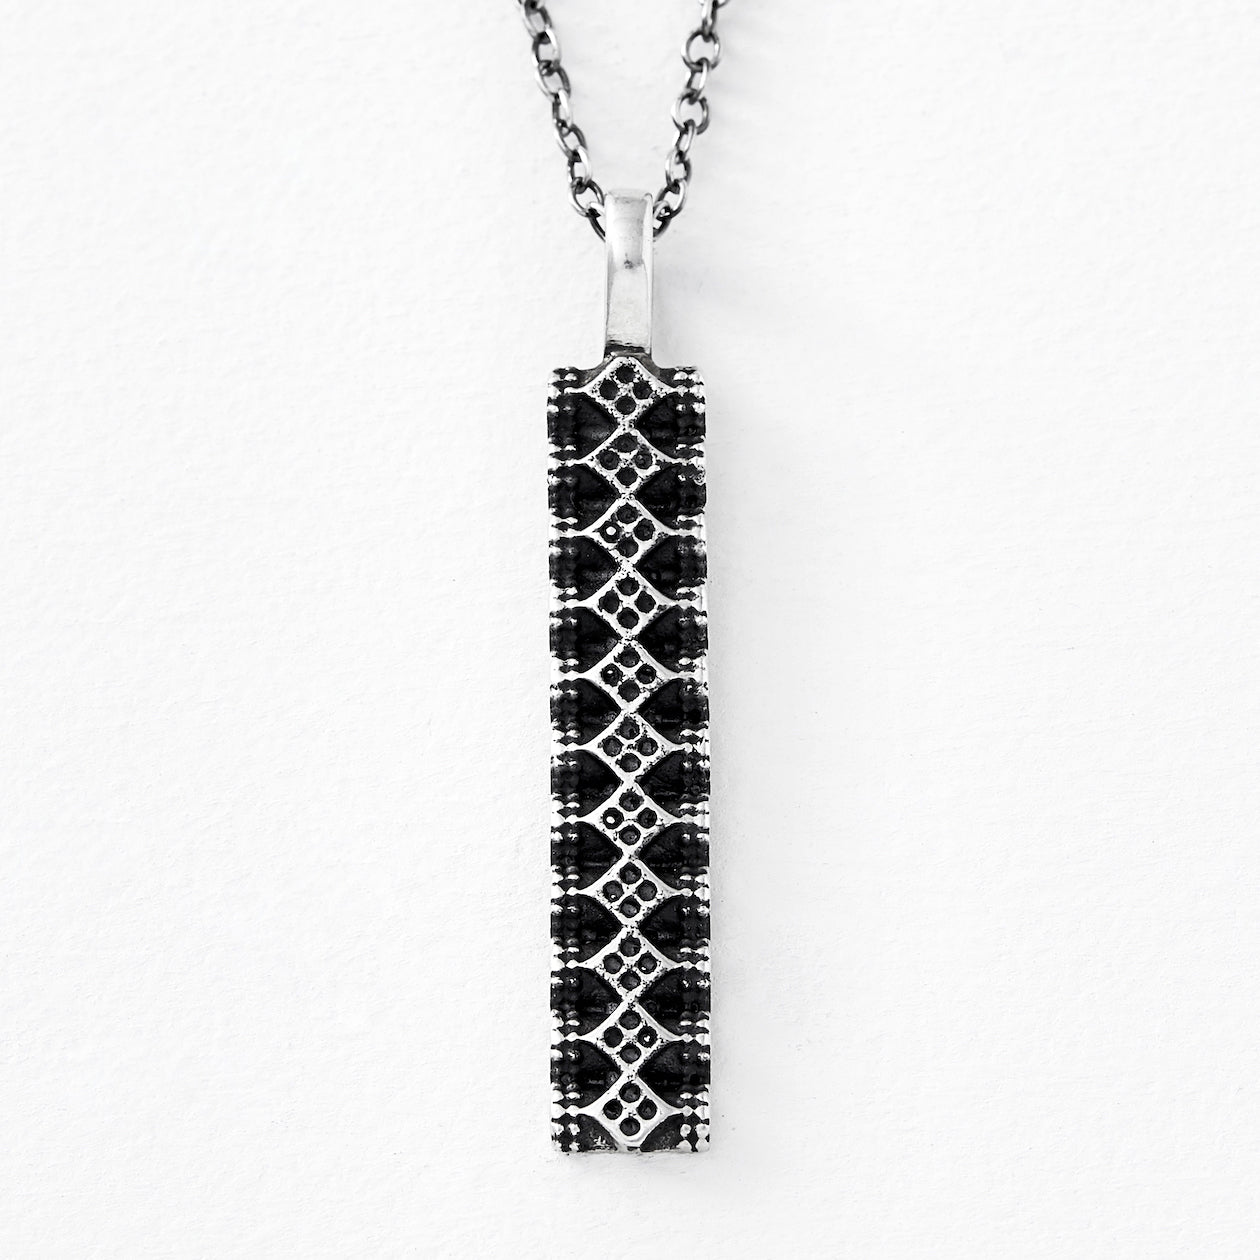 shielded necklace